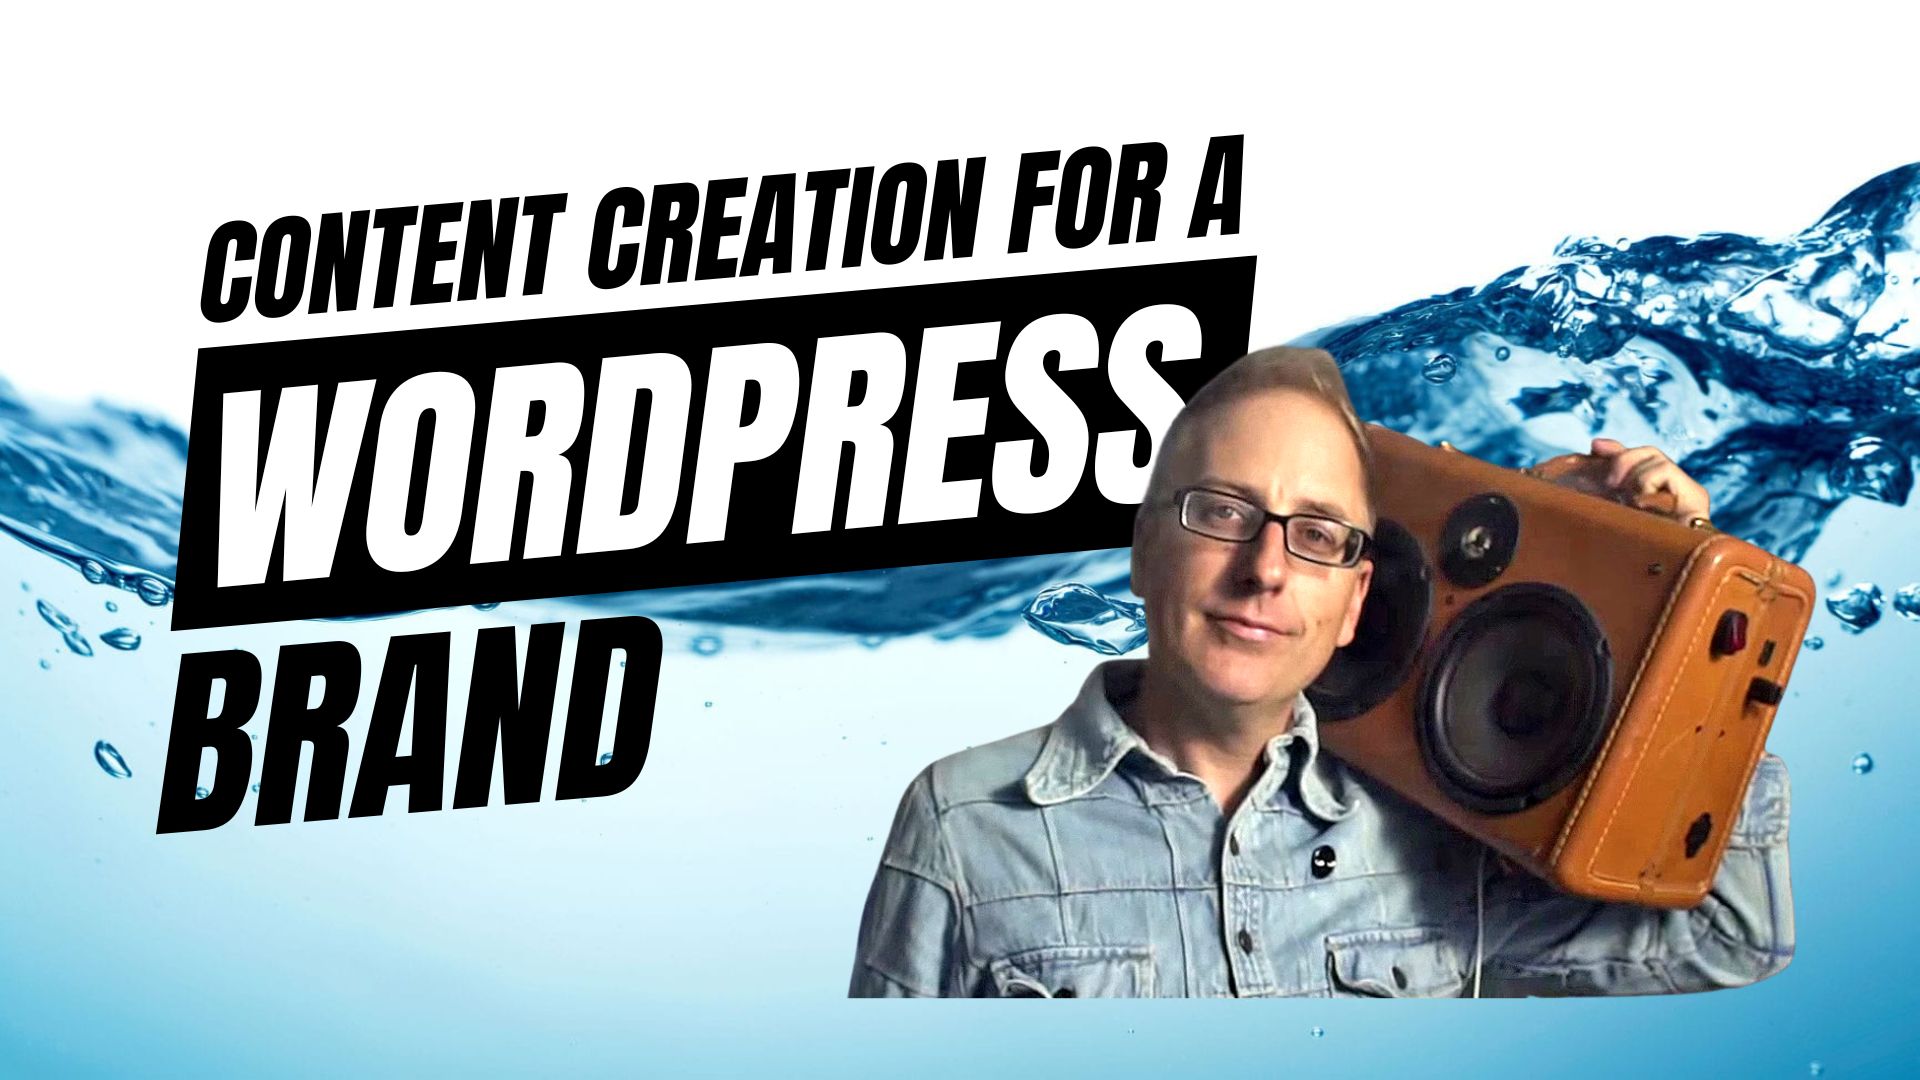 EP438 – Content Creation for a WordPress Brand